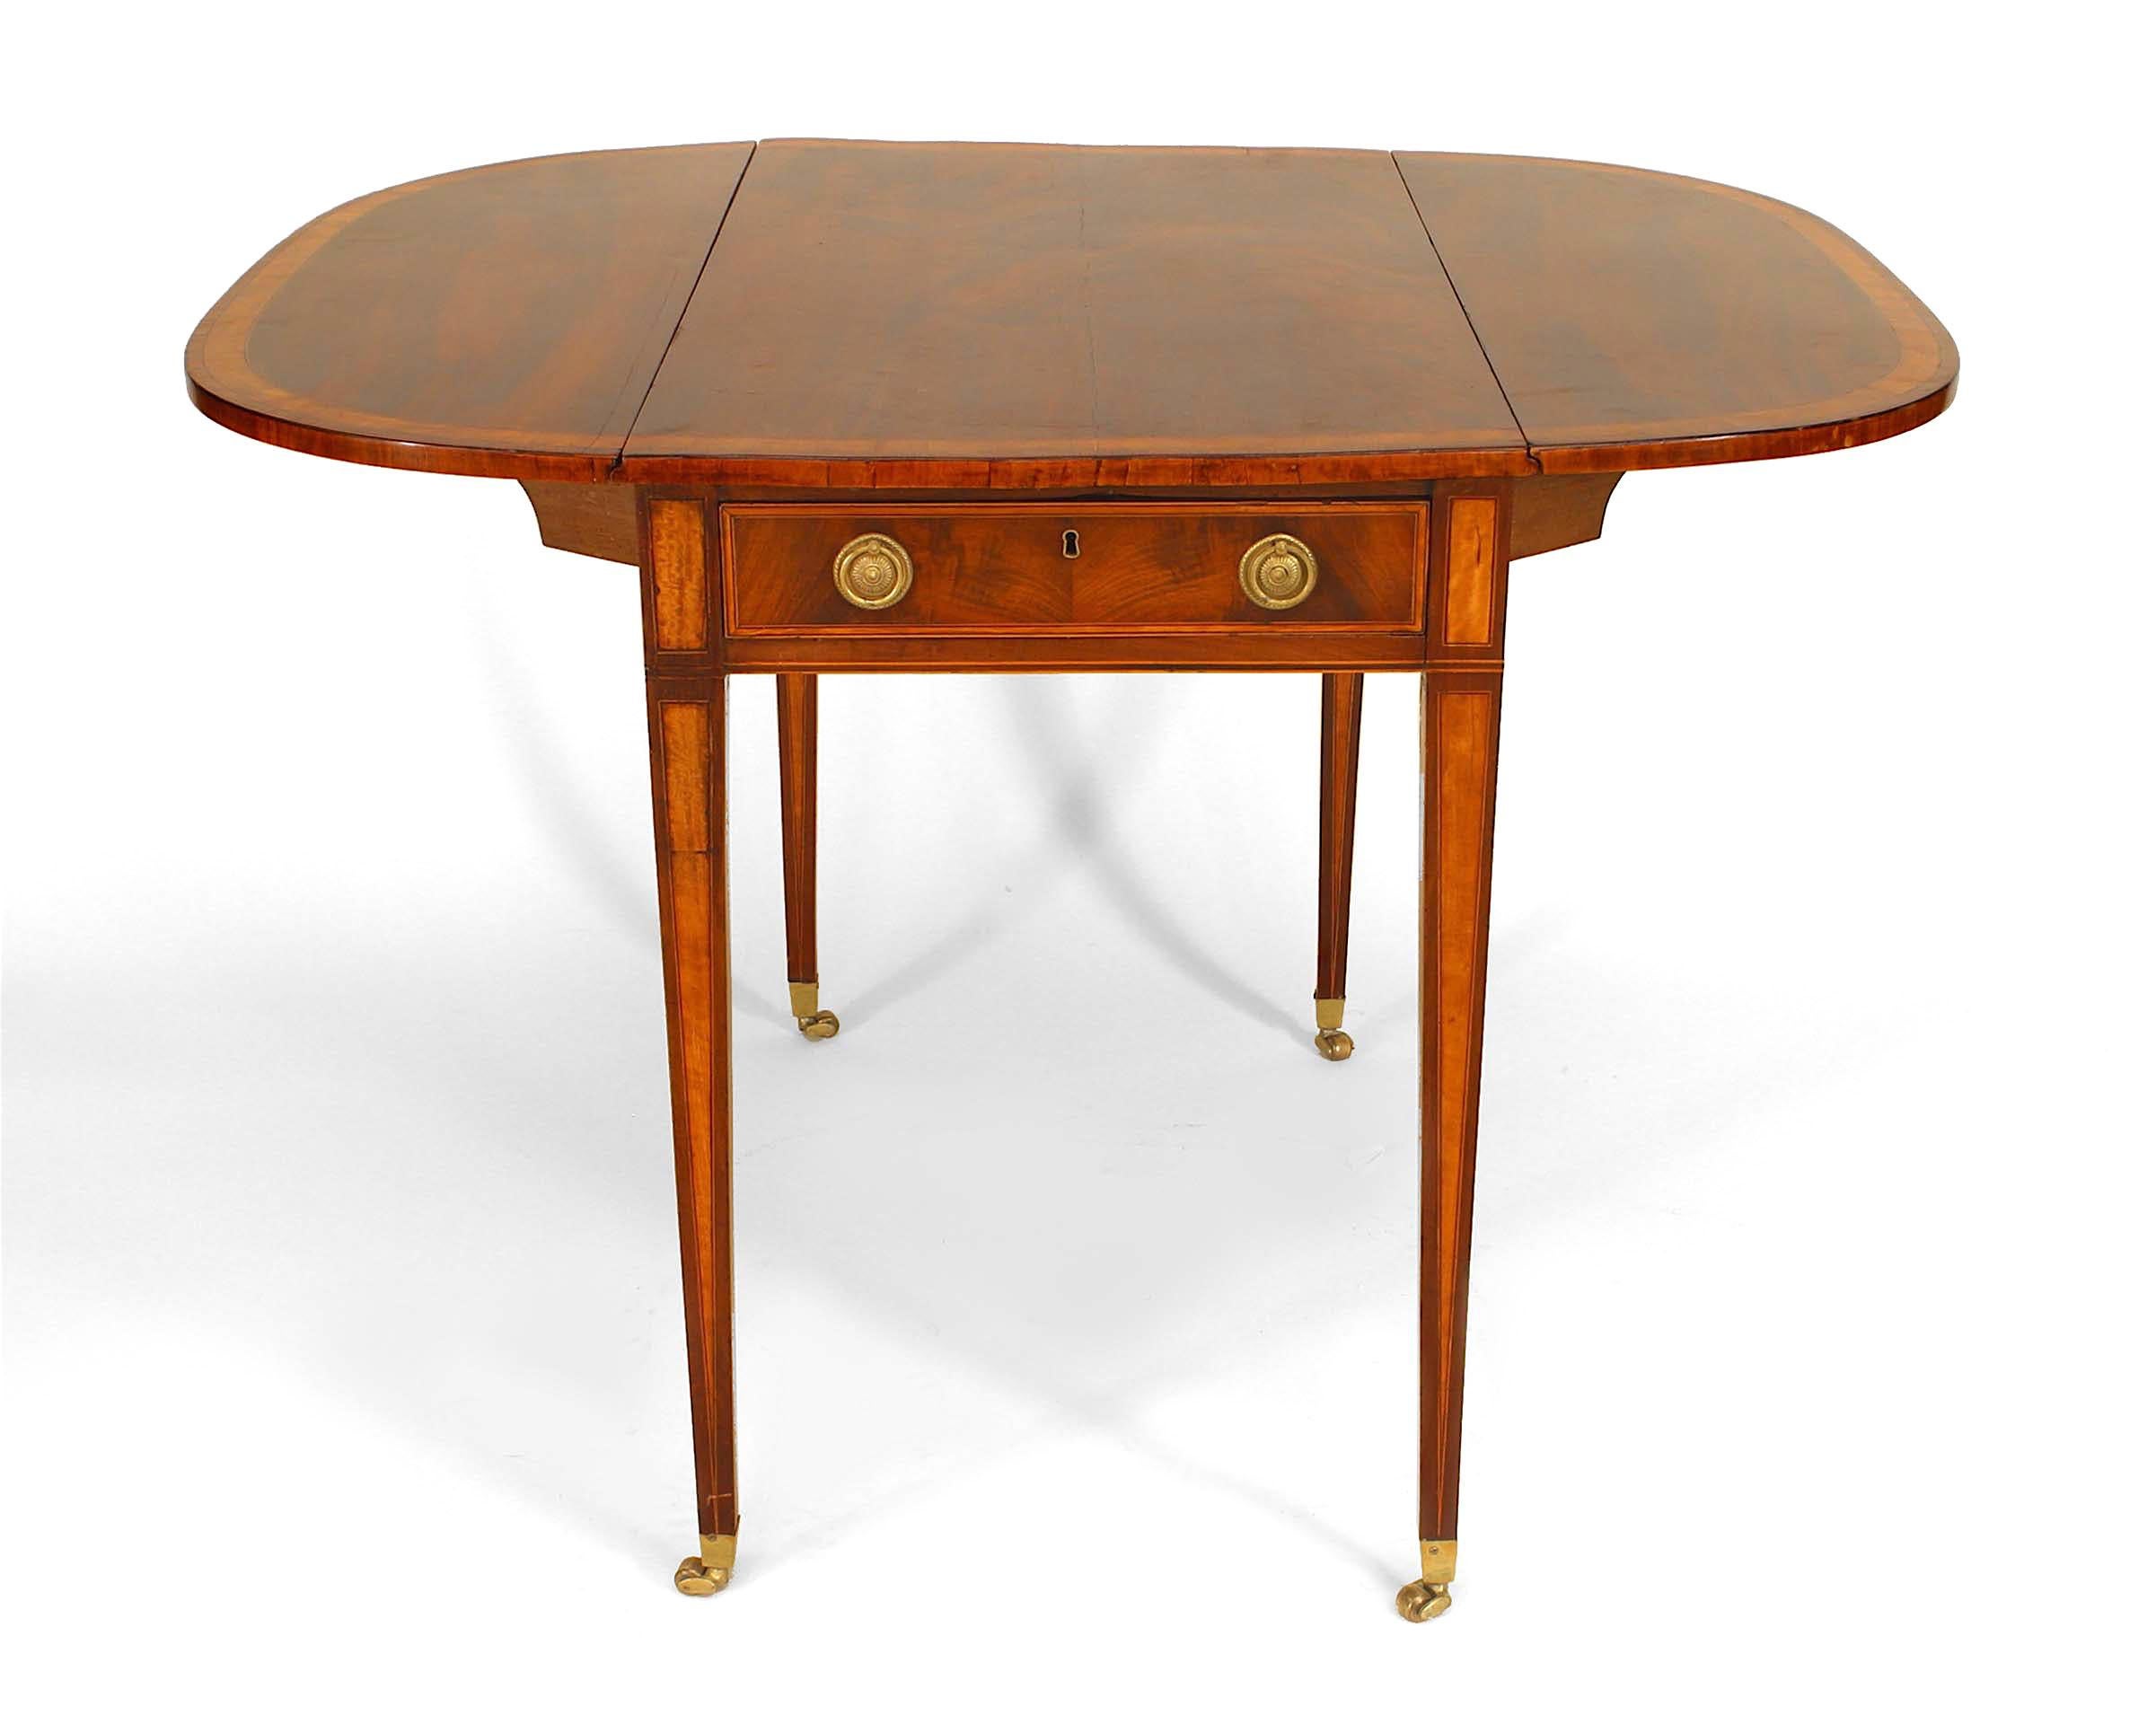 English Sheraton style (18th century) mahogany pembroke table with satinwood inlay and a drawer (11